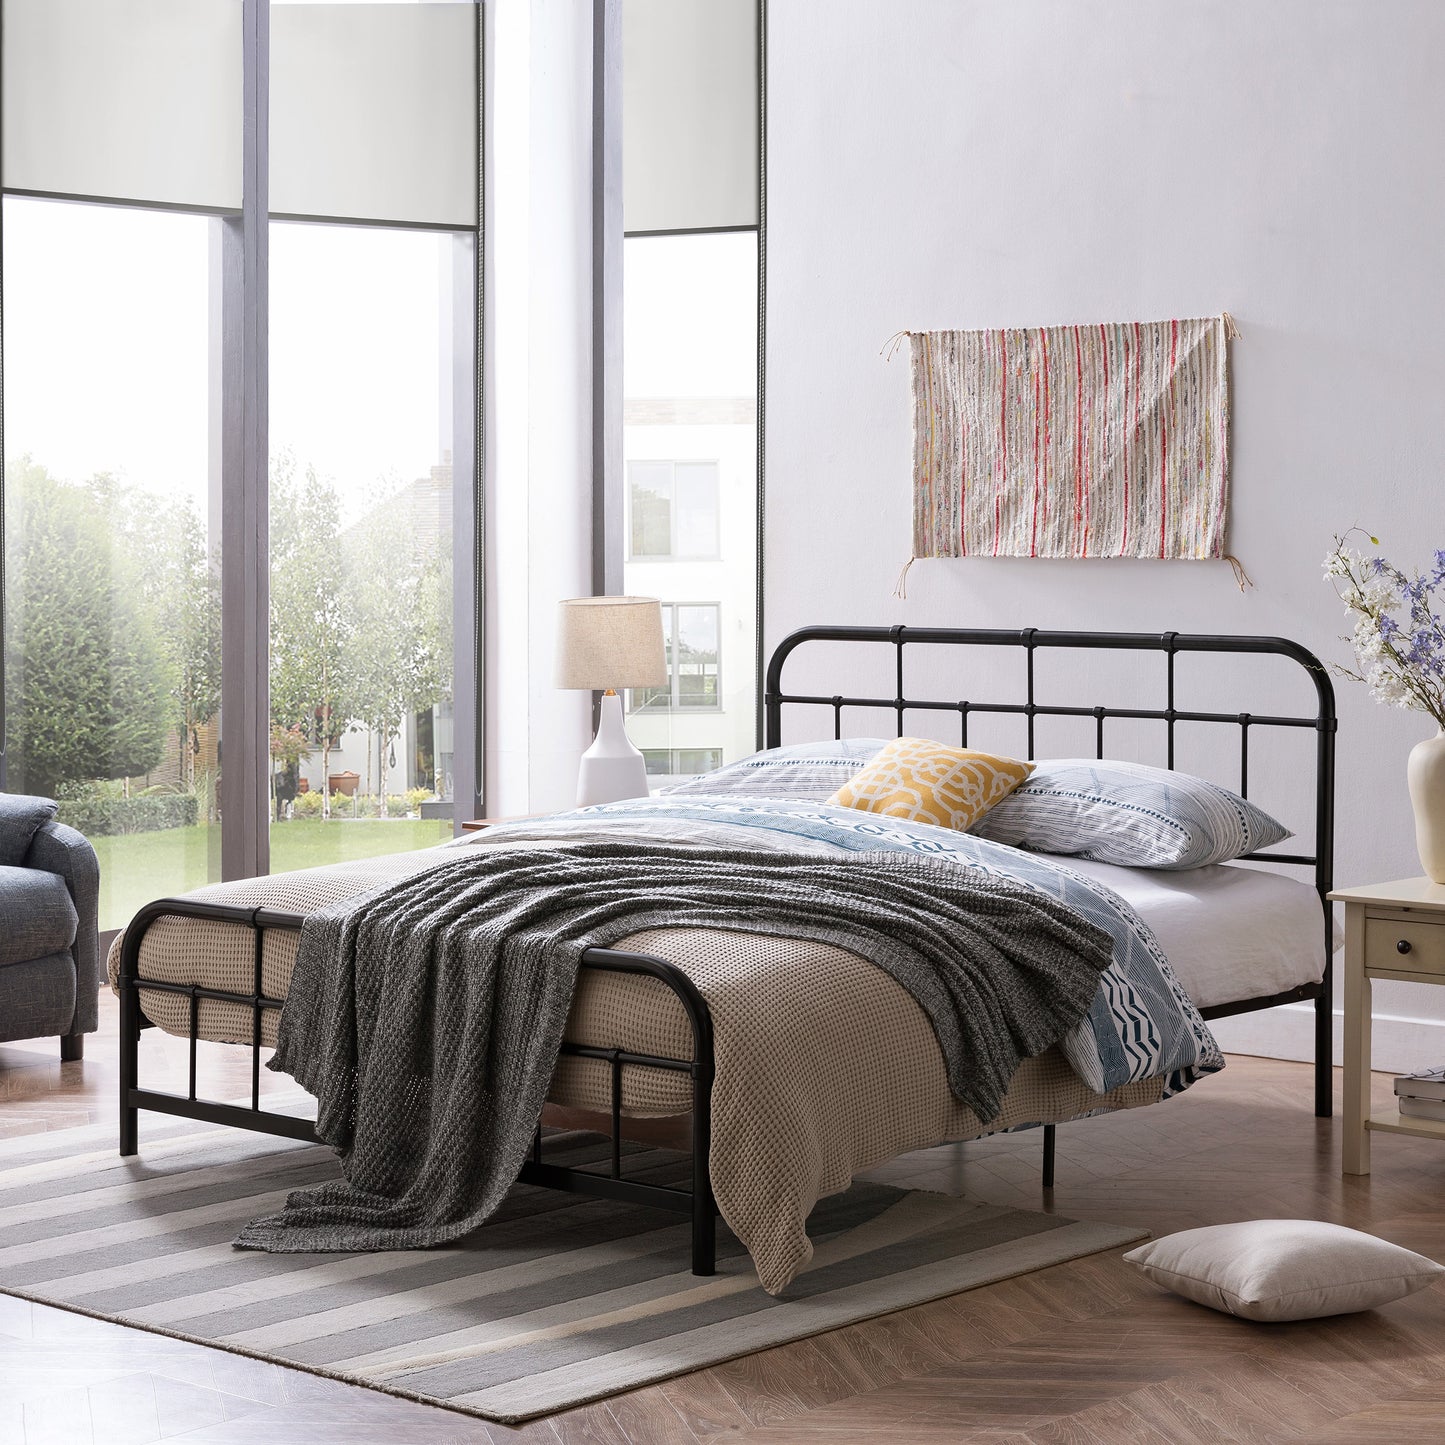 Sylvia Queen-Size Iron Bed Frame, Minimal, Industrial